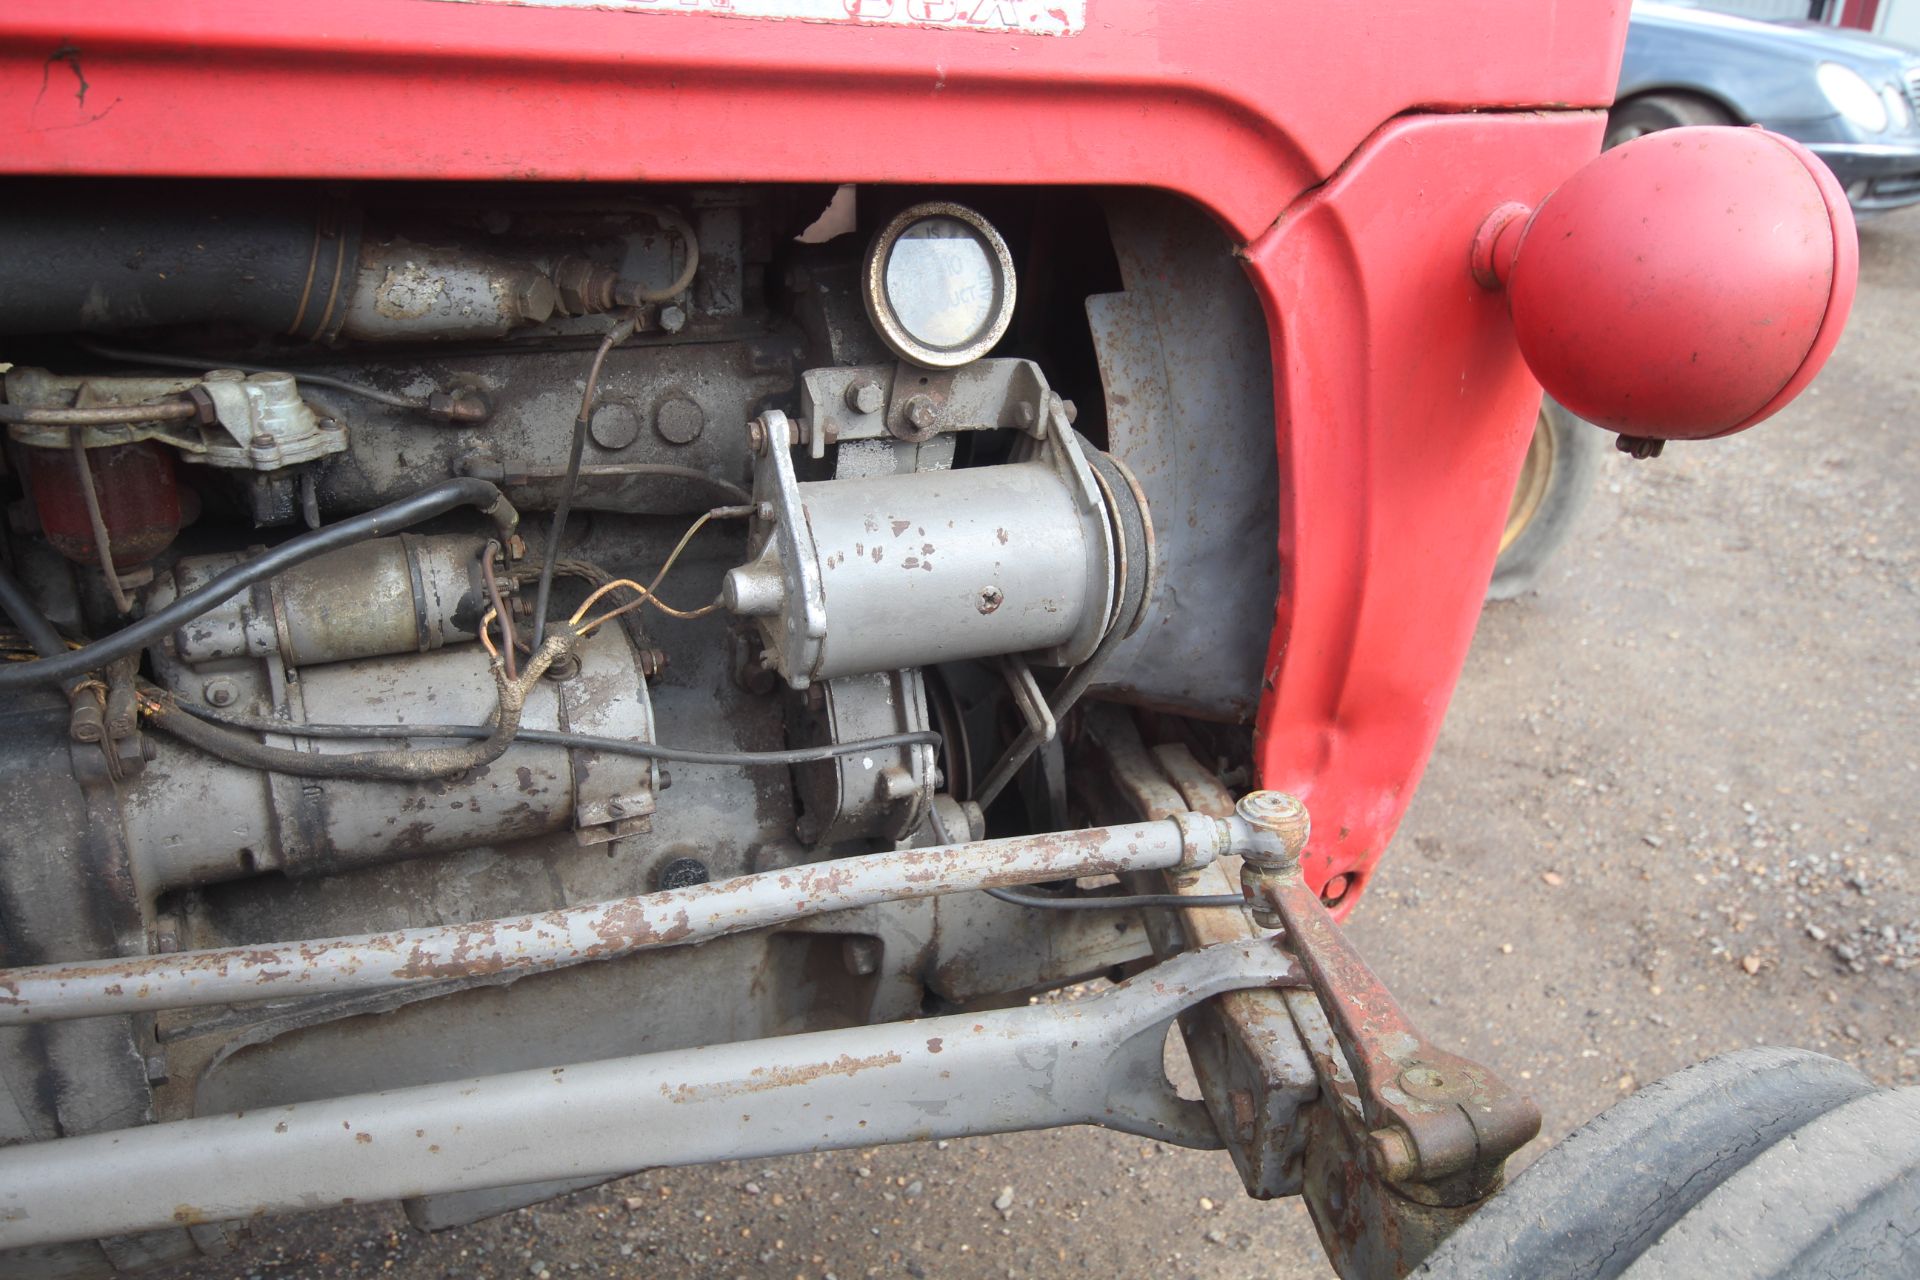 Massey Ferguson 35X 2WD tractor. 1963. Serial number SNMY313859. 11-28 rear wheels and tyres. - Image 33 of 43